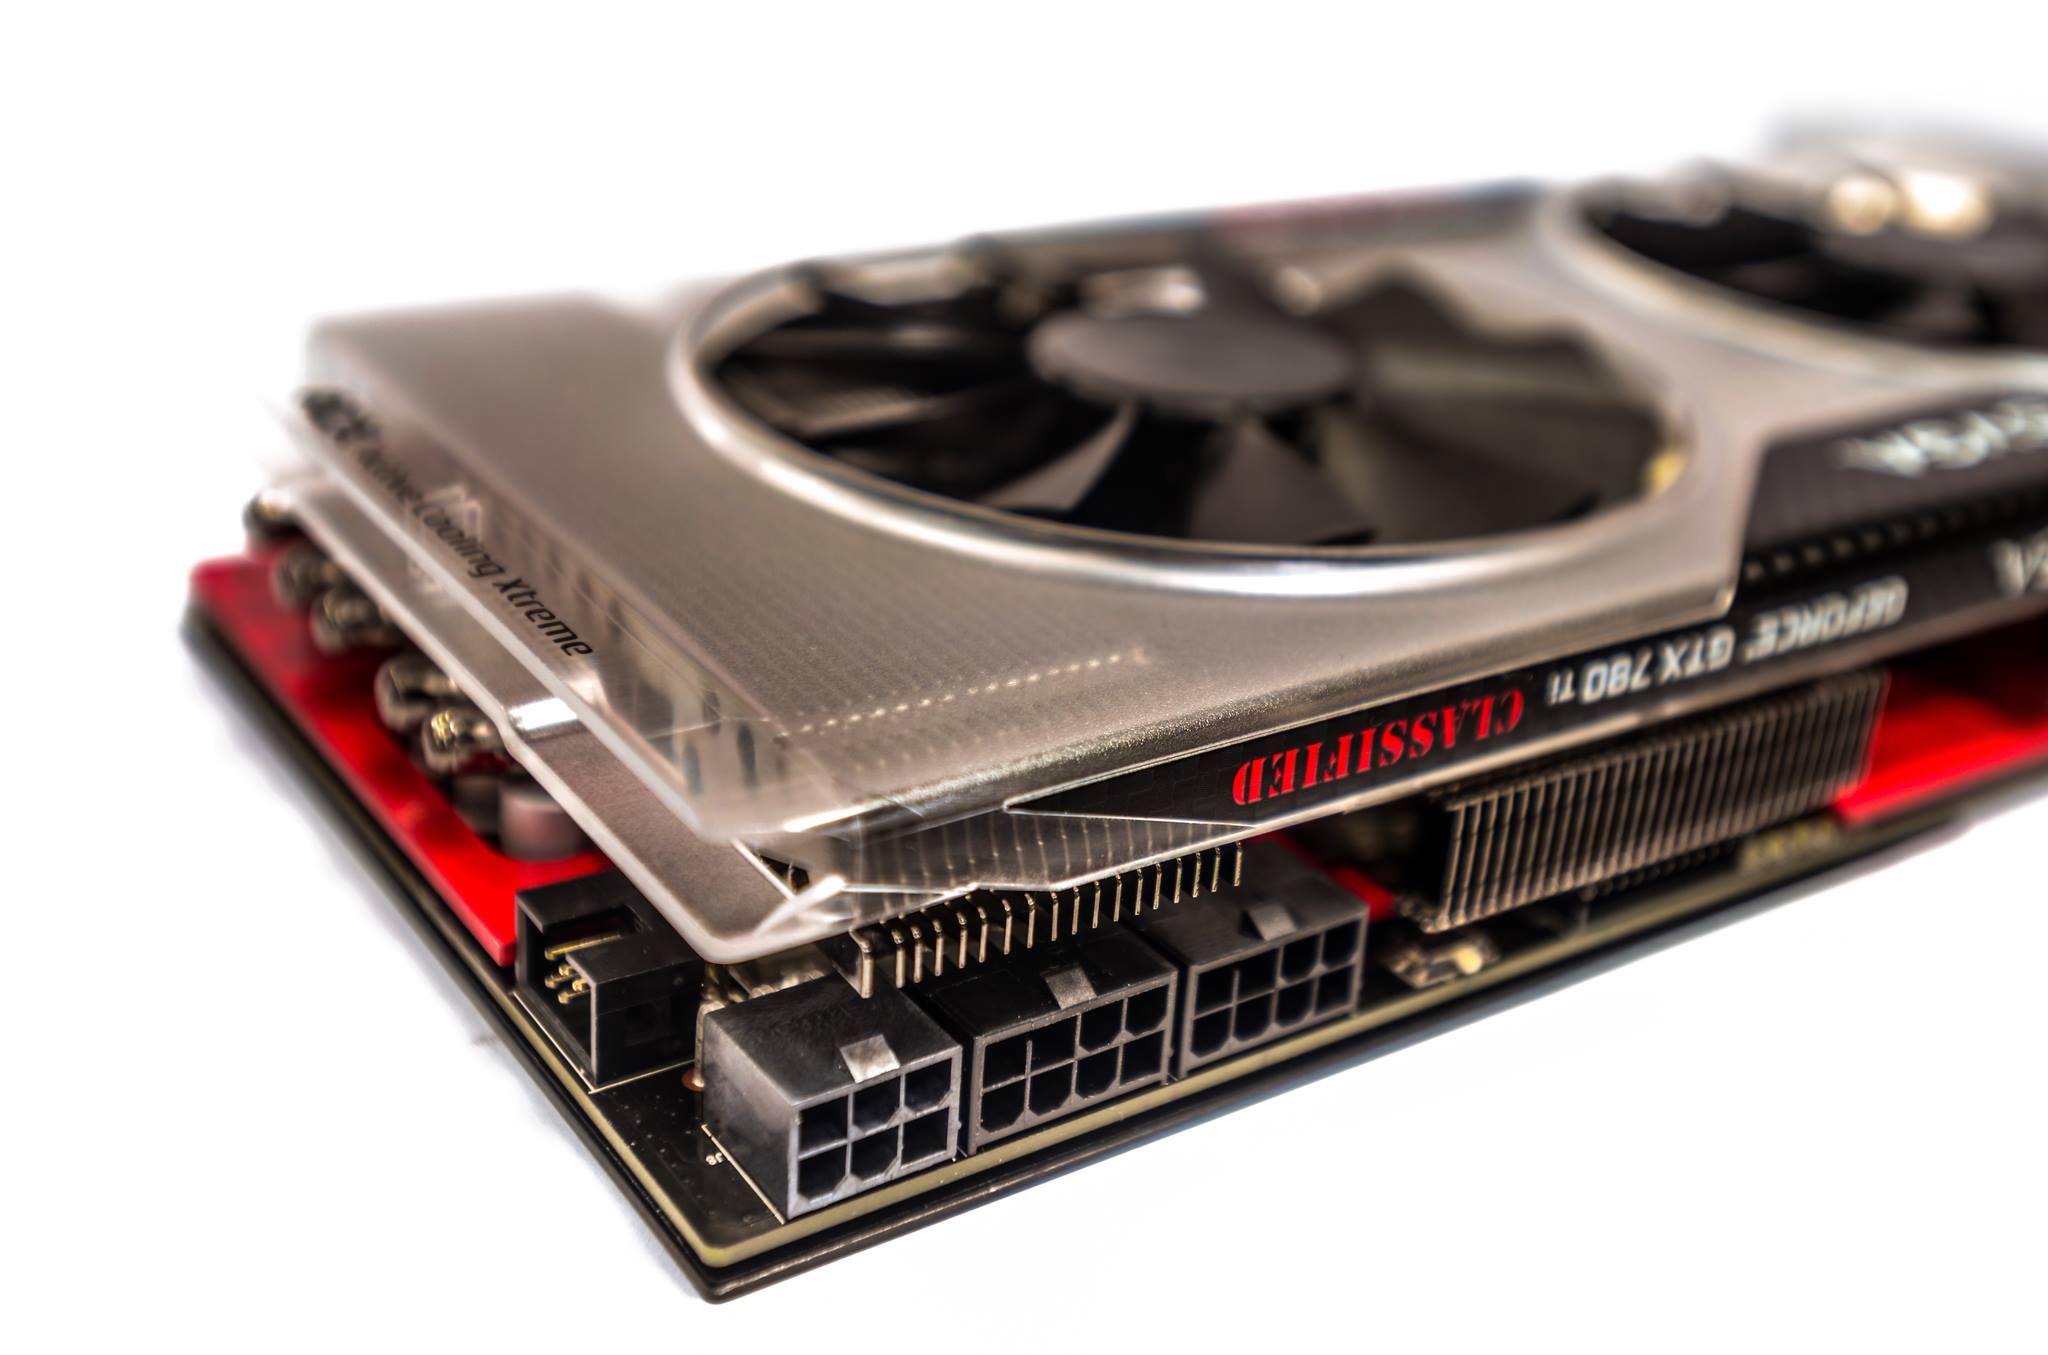 Evga Geforce Gtx 780 Ti Classified Kingpin Edition Pictured Some More Videocardz Com